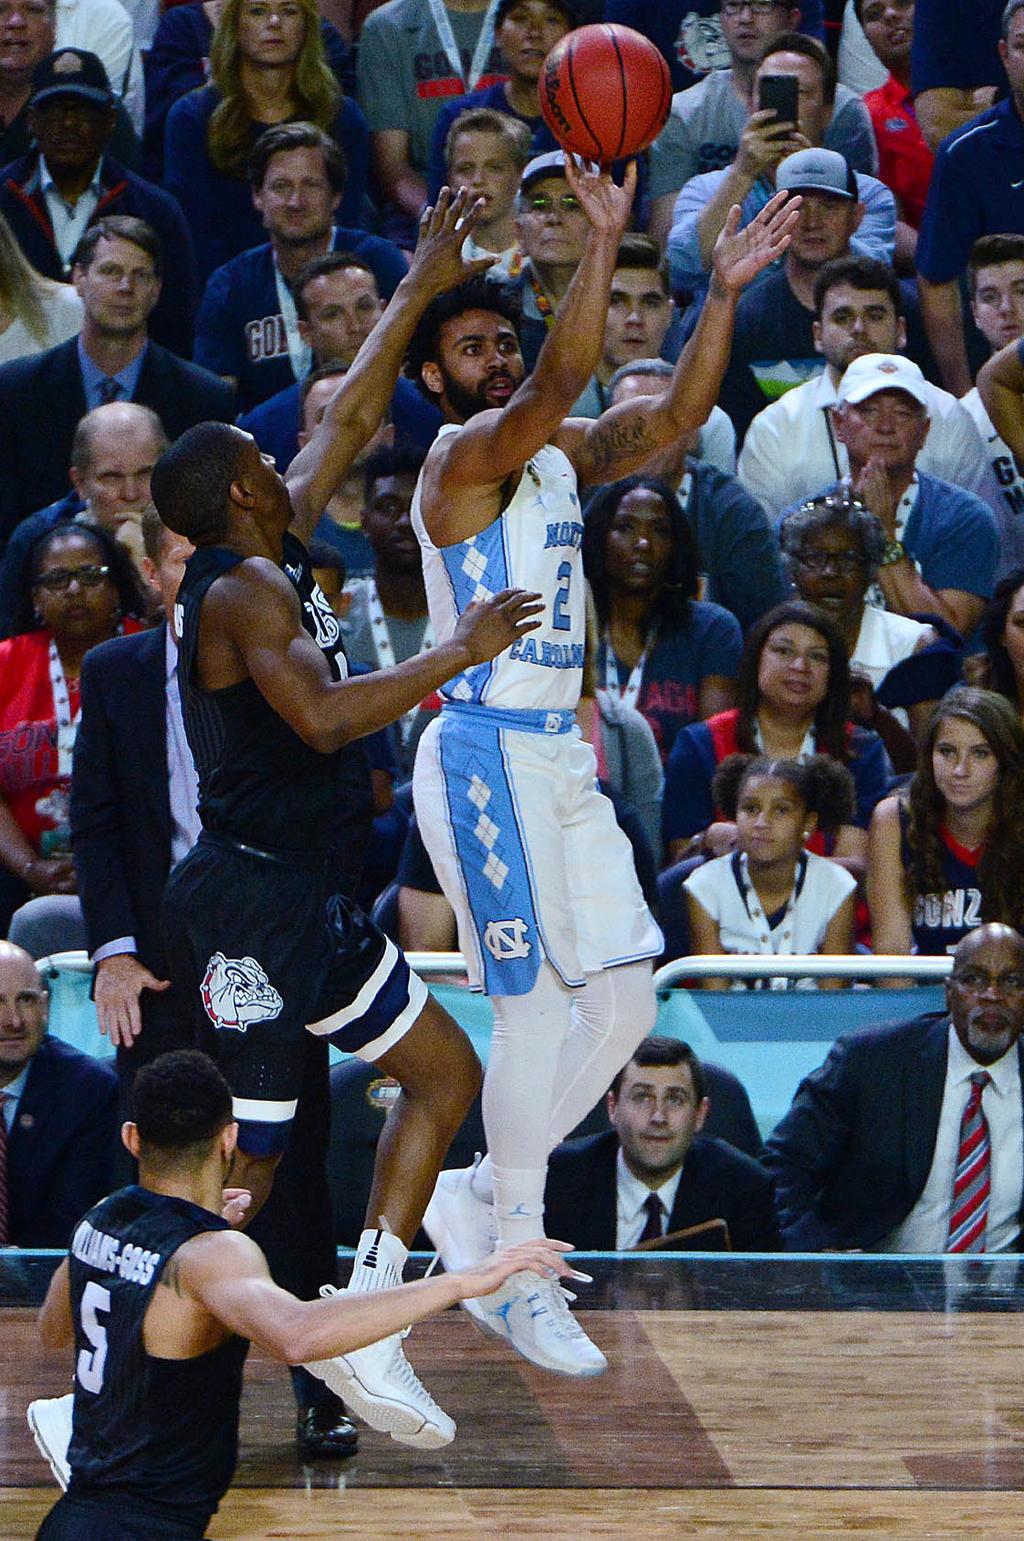 The 13 attempts were the most ever by a Tar Heel in an NCAA Tournament game and equaled the second-most by a Tar Heel in the Roy Williams era.